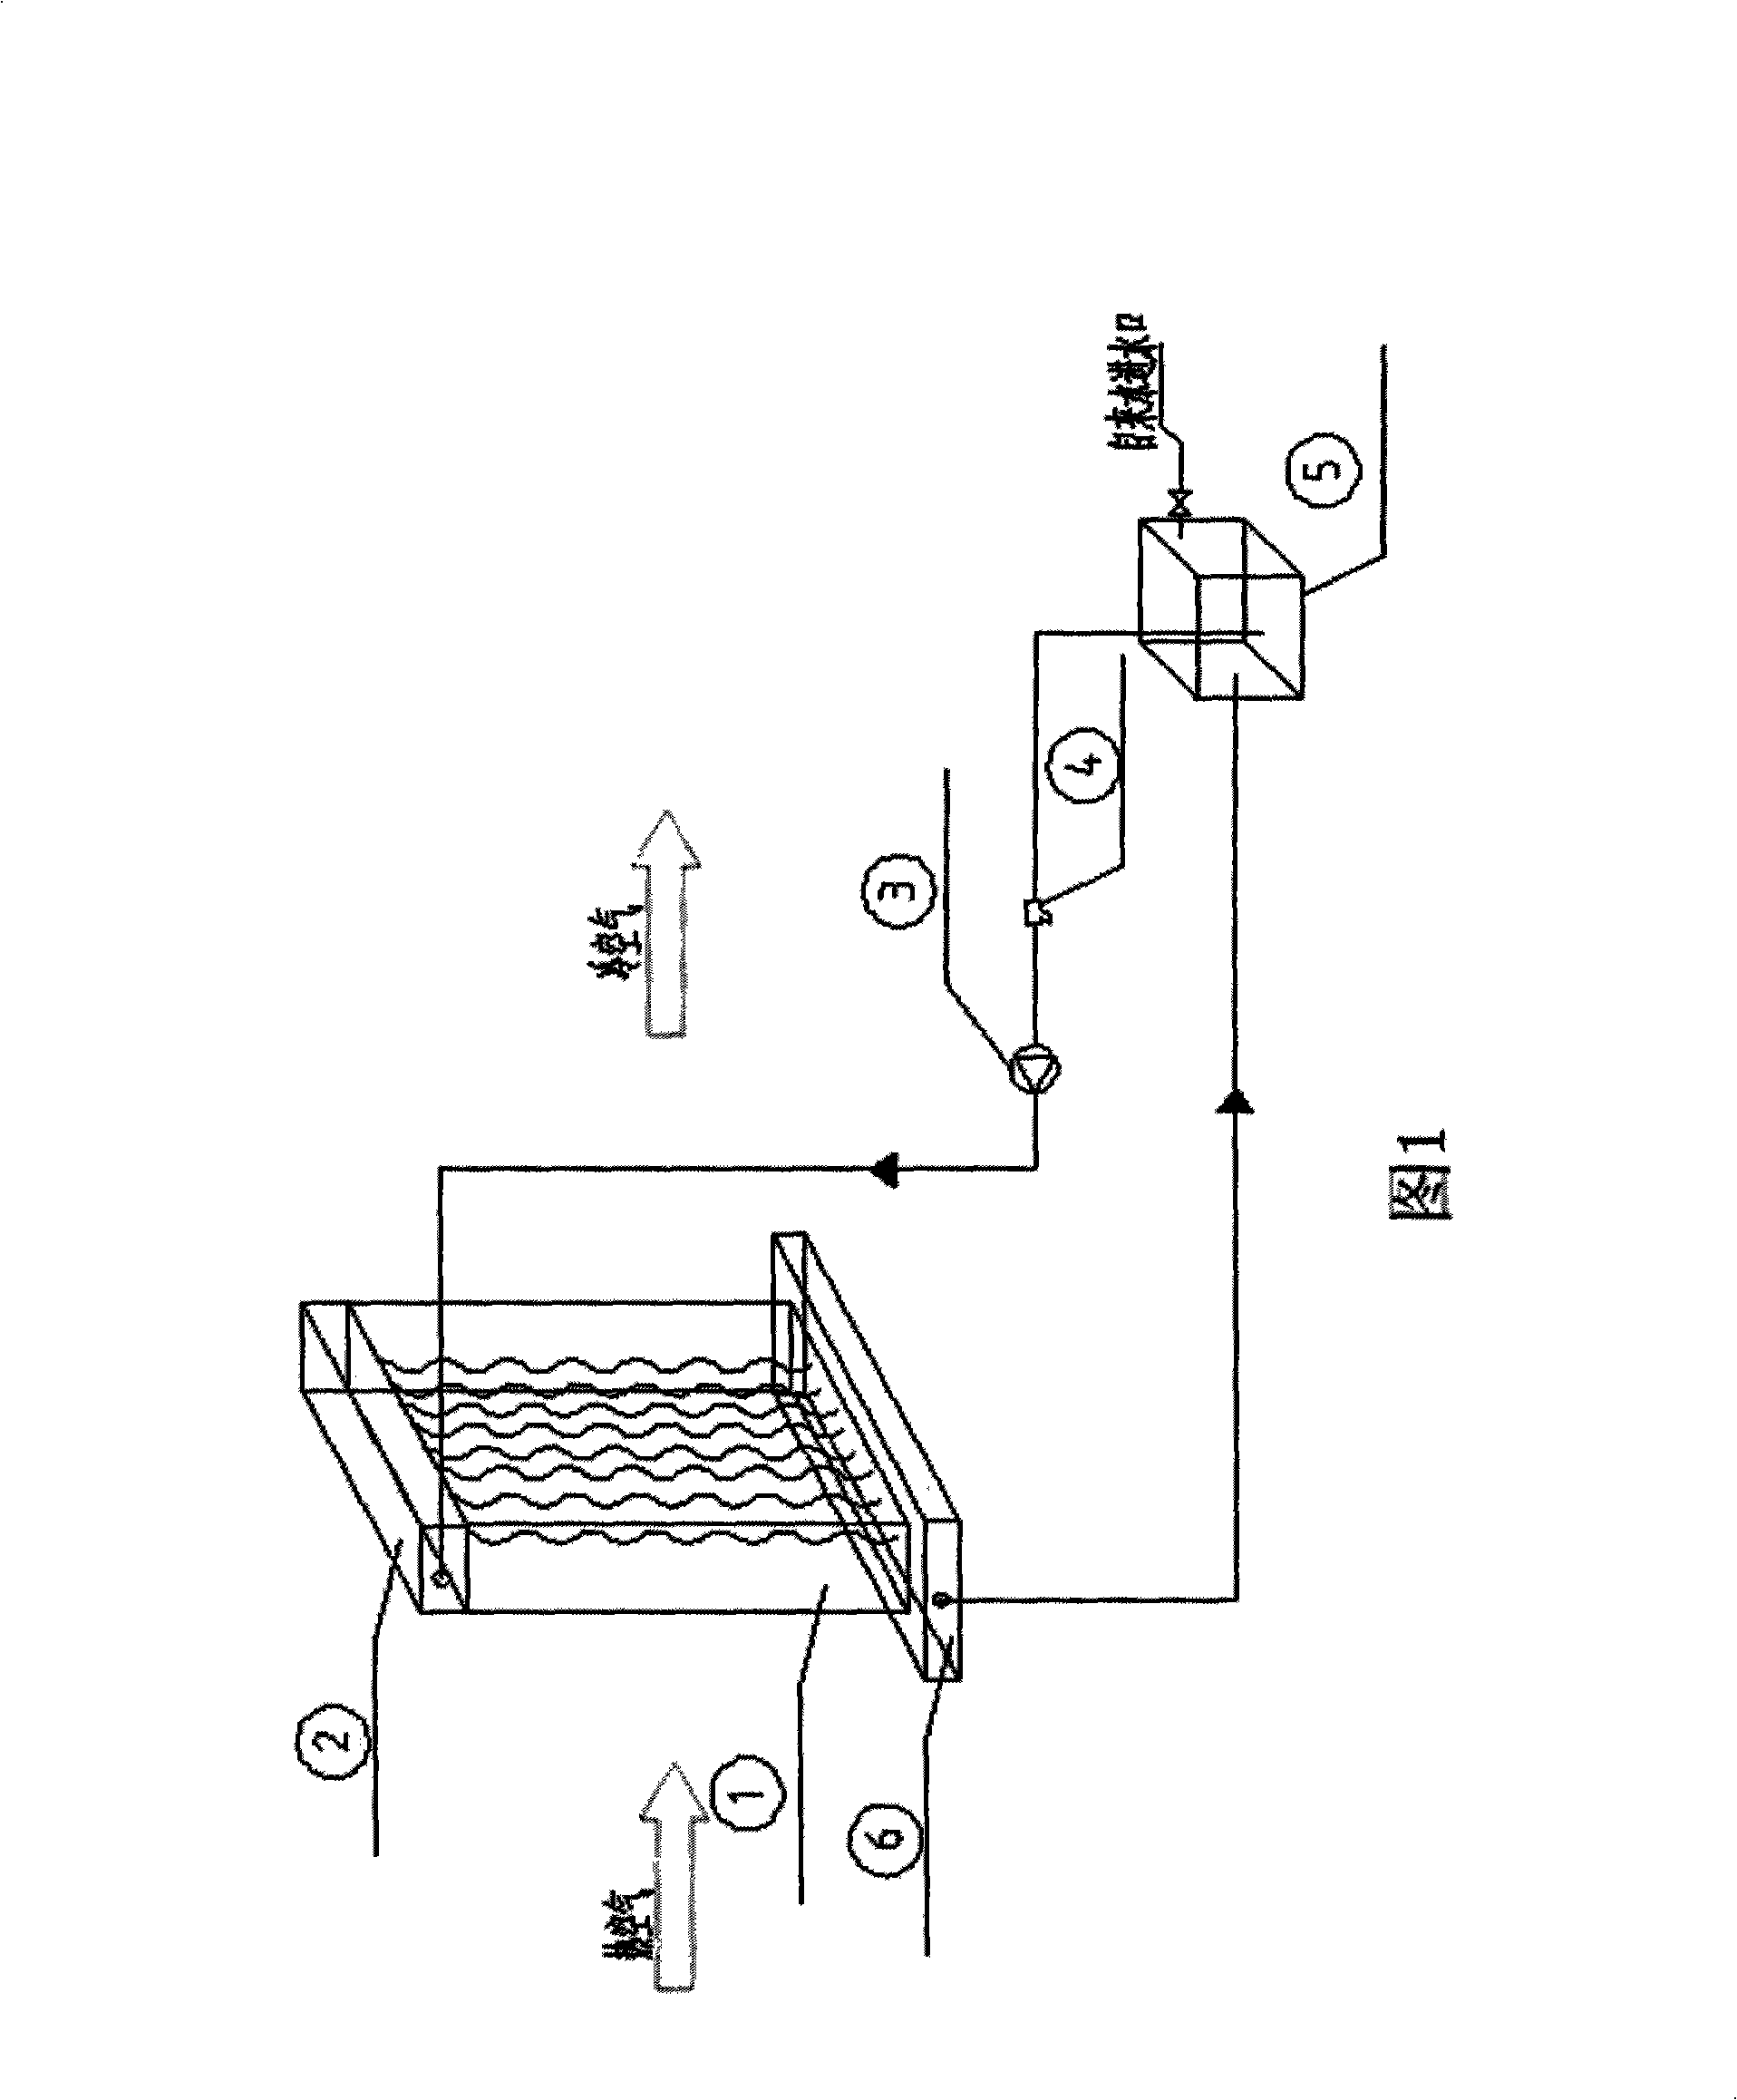 Method and apparatus for cooling air by three-stage vapour cooling